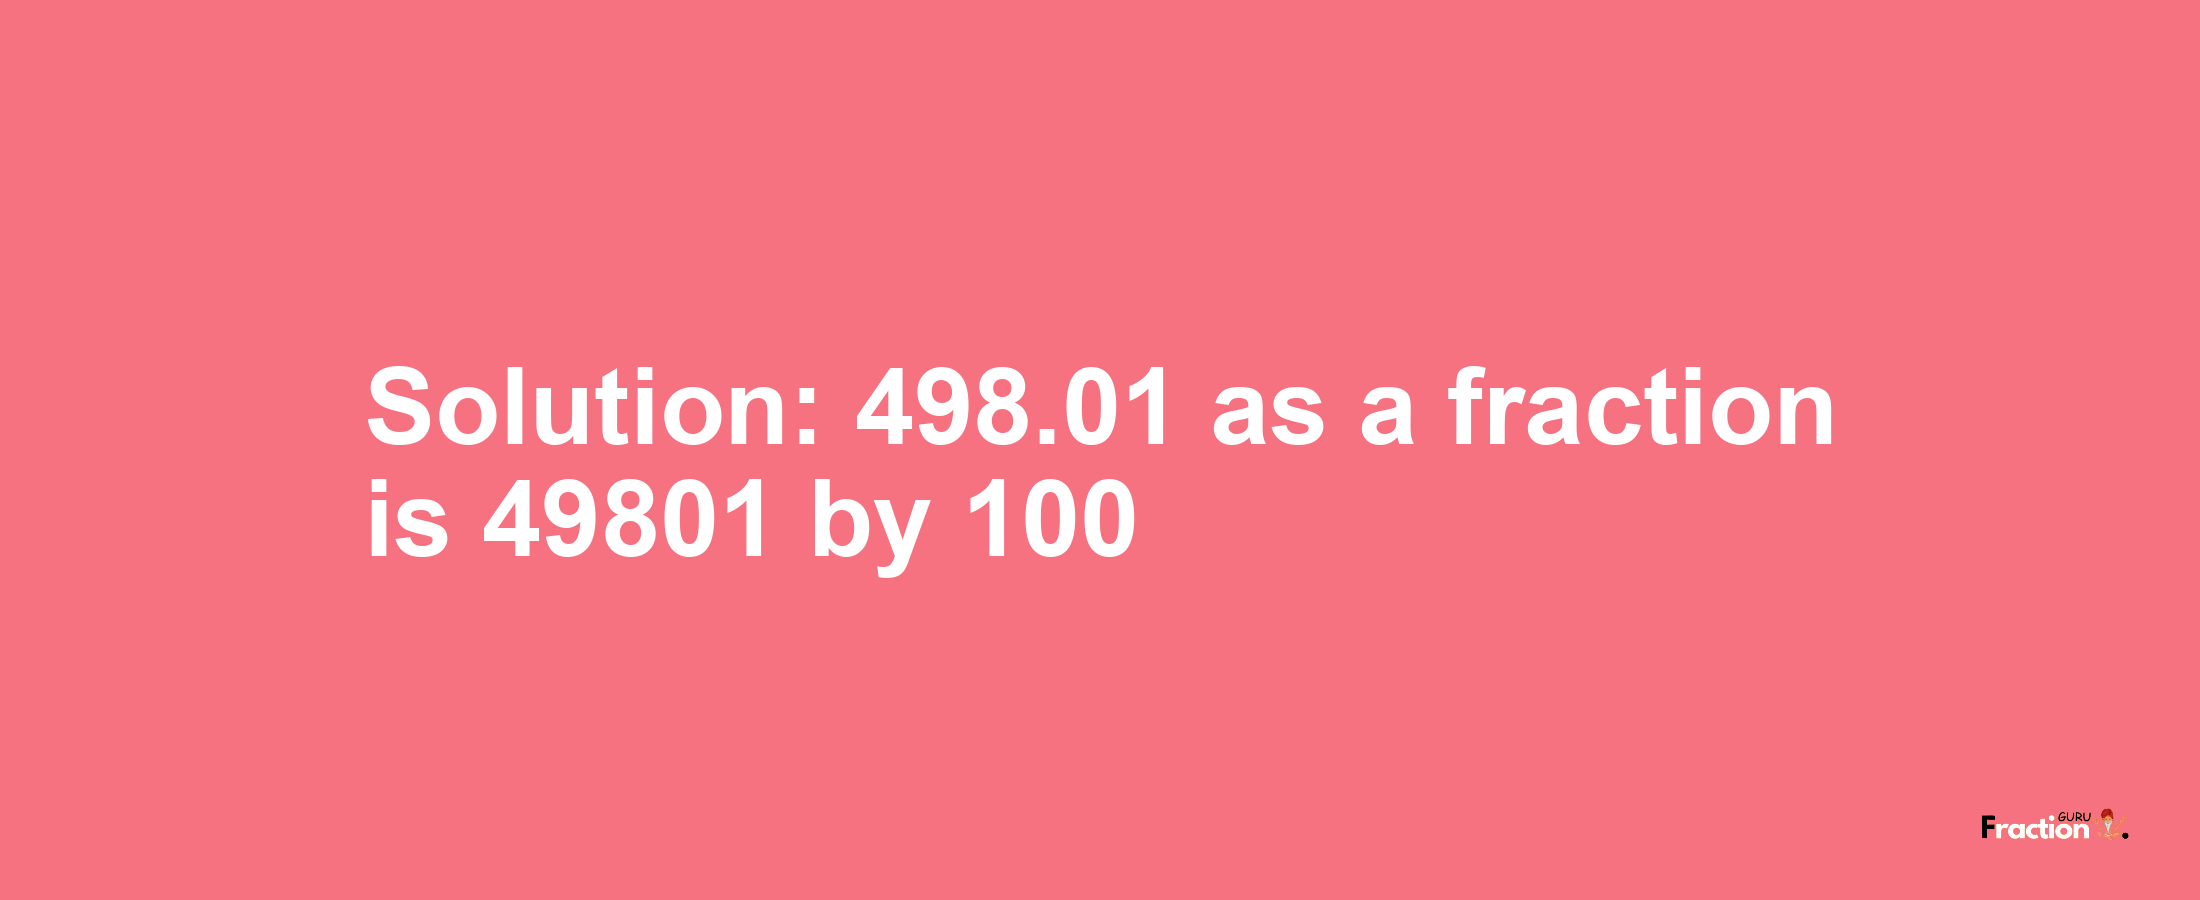 Solution:498.01 as a fraction is 49801/100